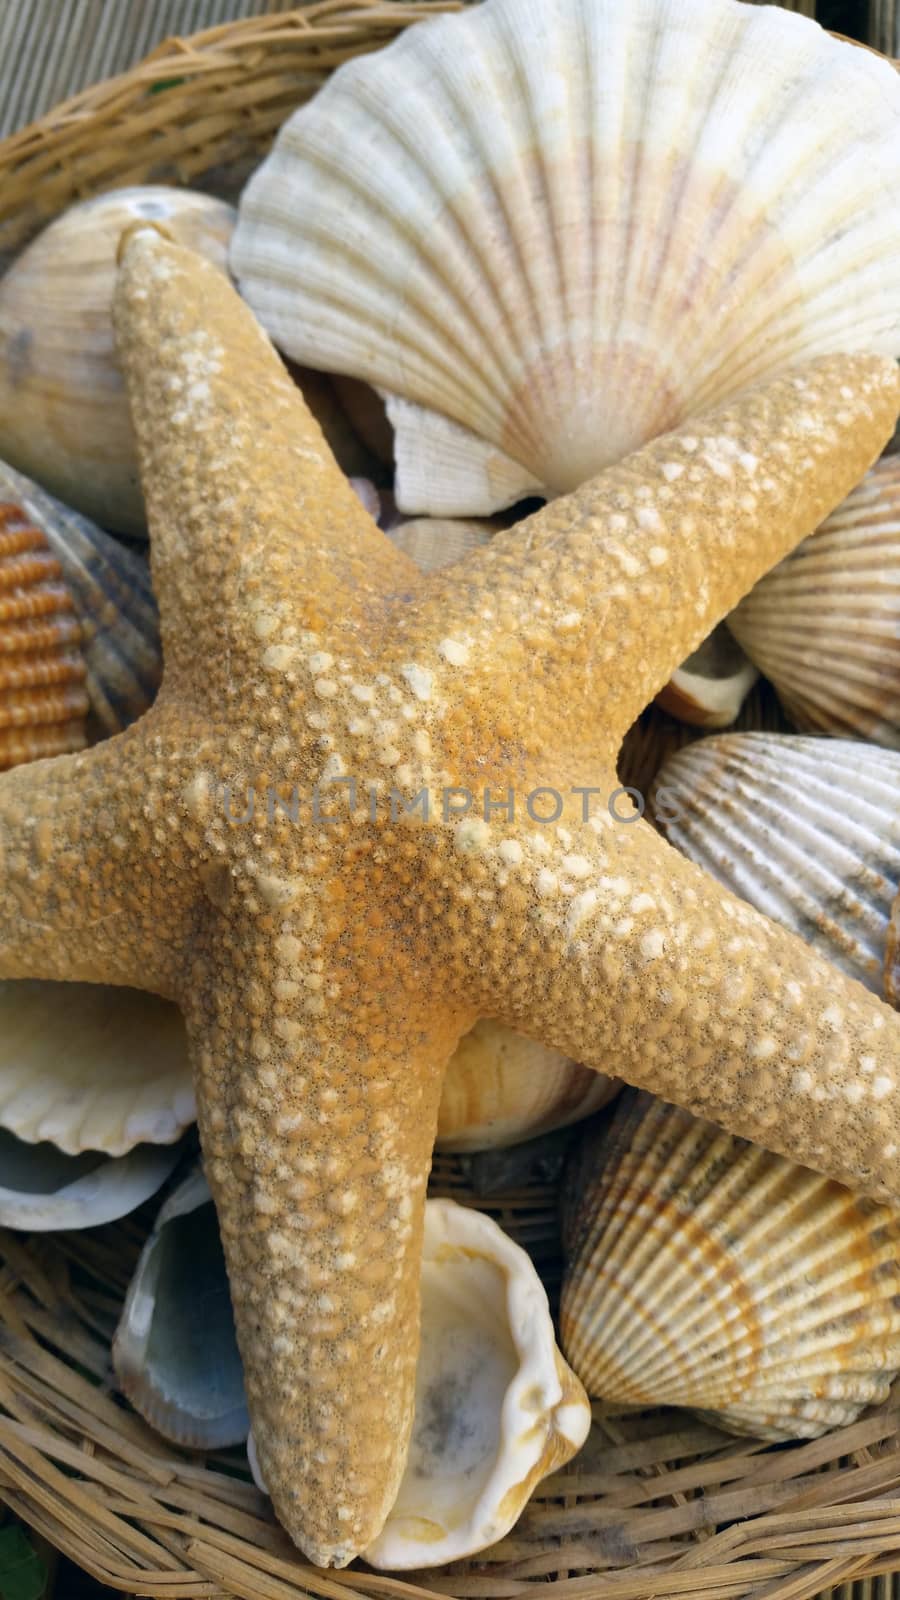 Starfish and Shells in a Straw Basket